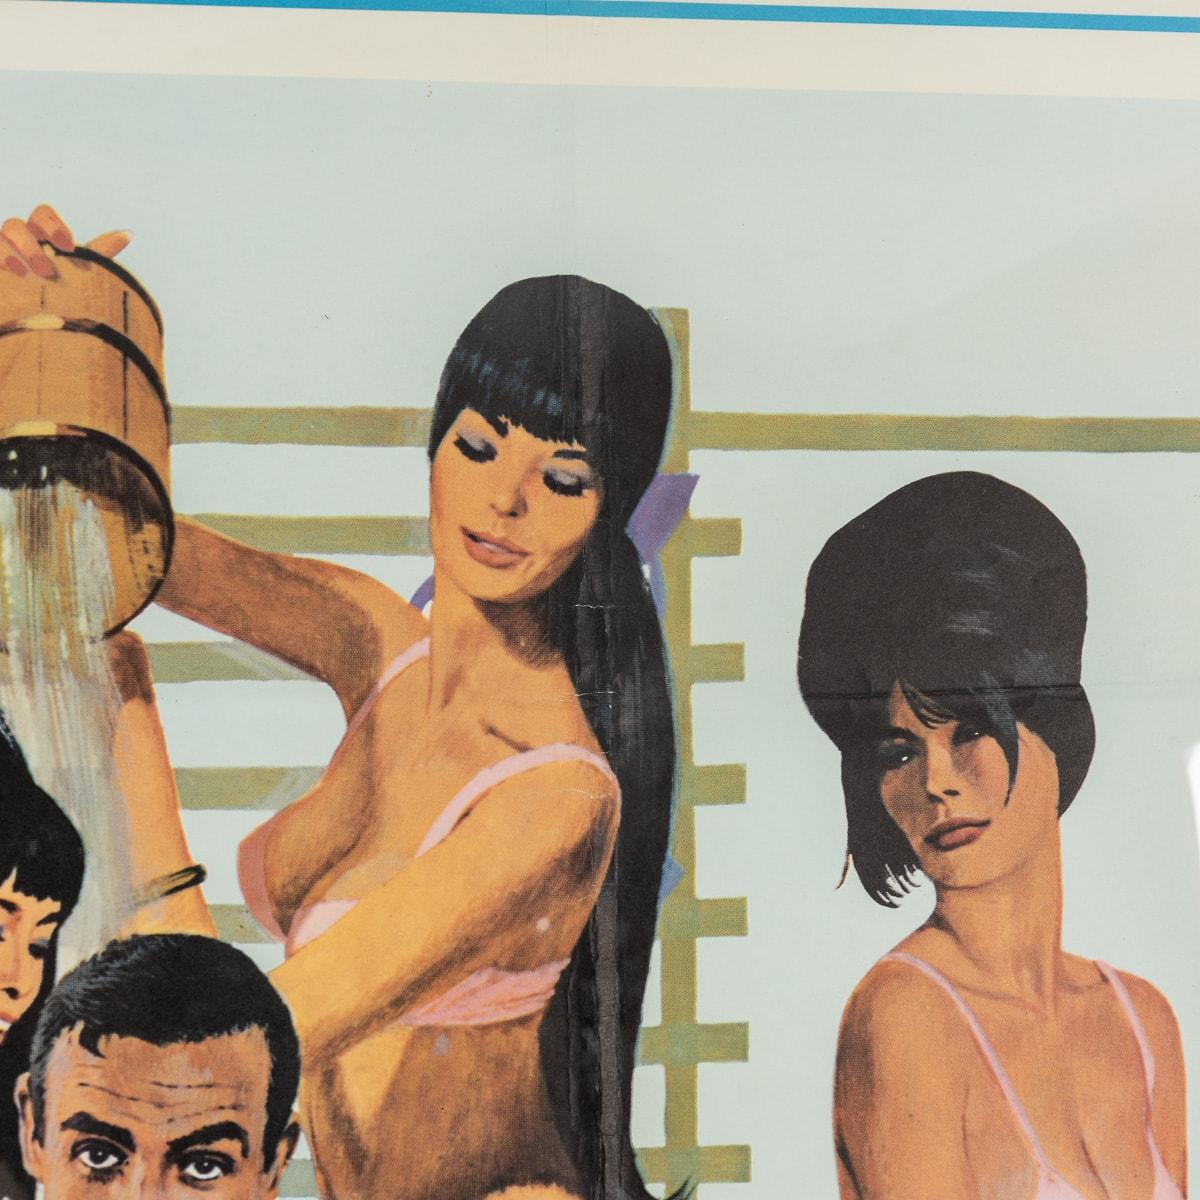 Original U.S Release James Bond 007 'You Only Live Twice' Subway C Poster c.1967 For Sale 6